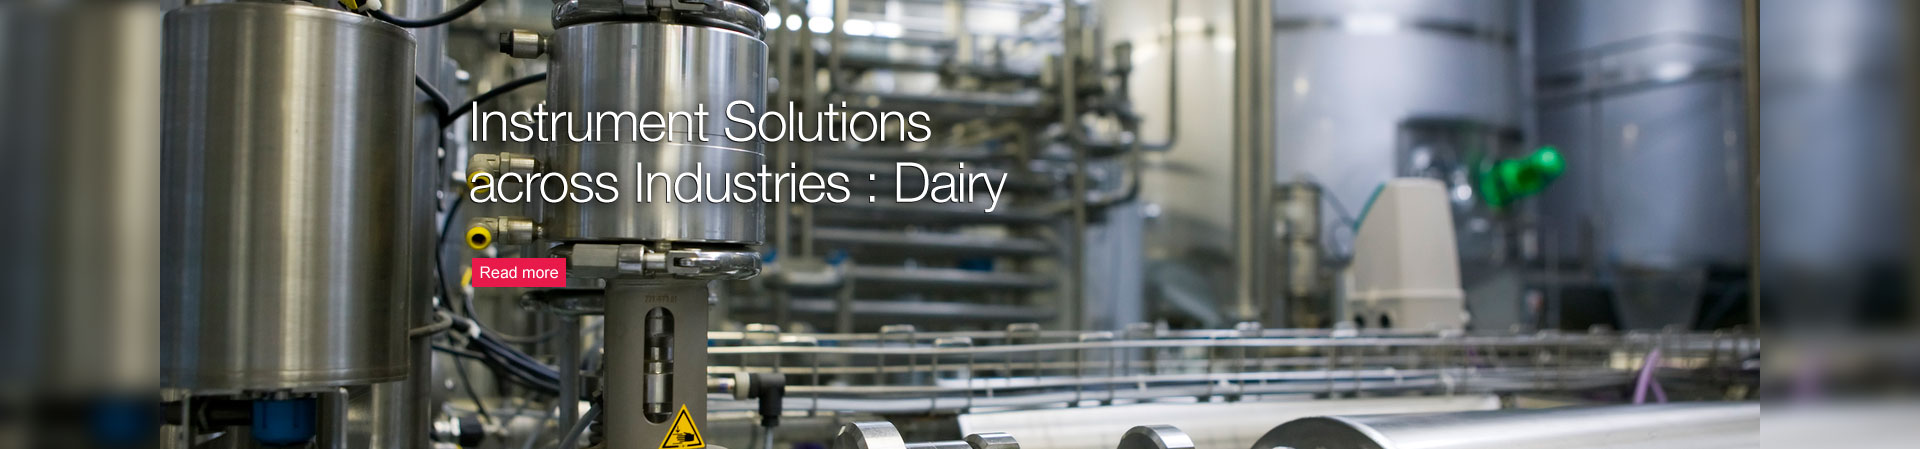 Instrument Solutions across Industries: Dairy